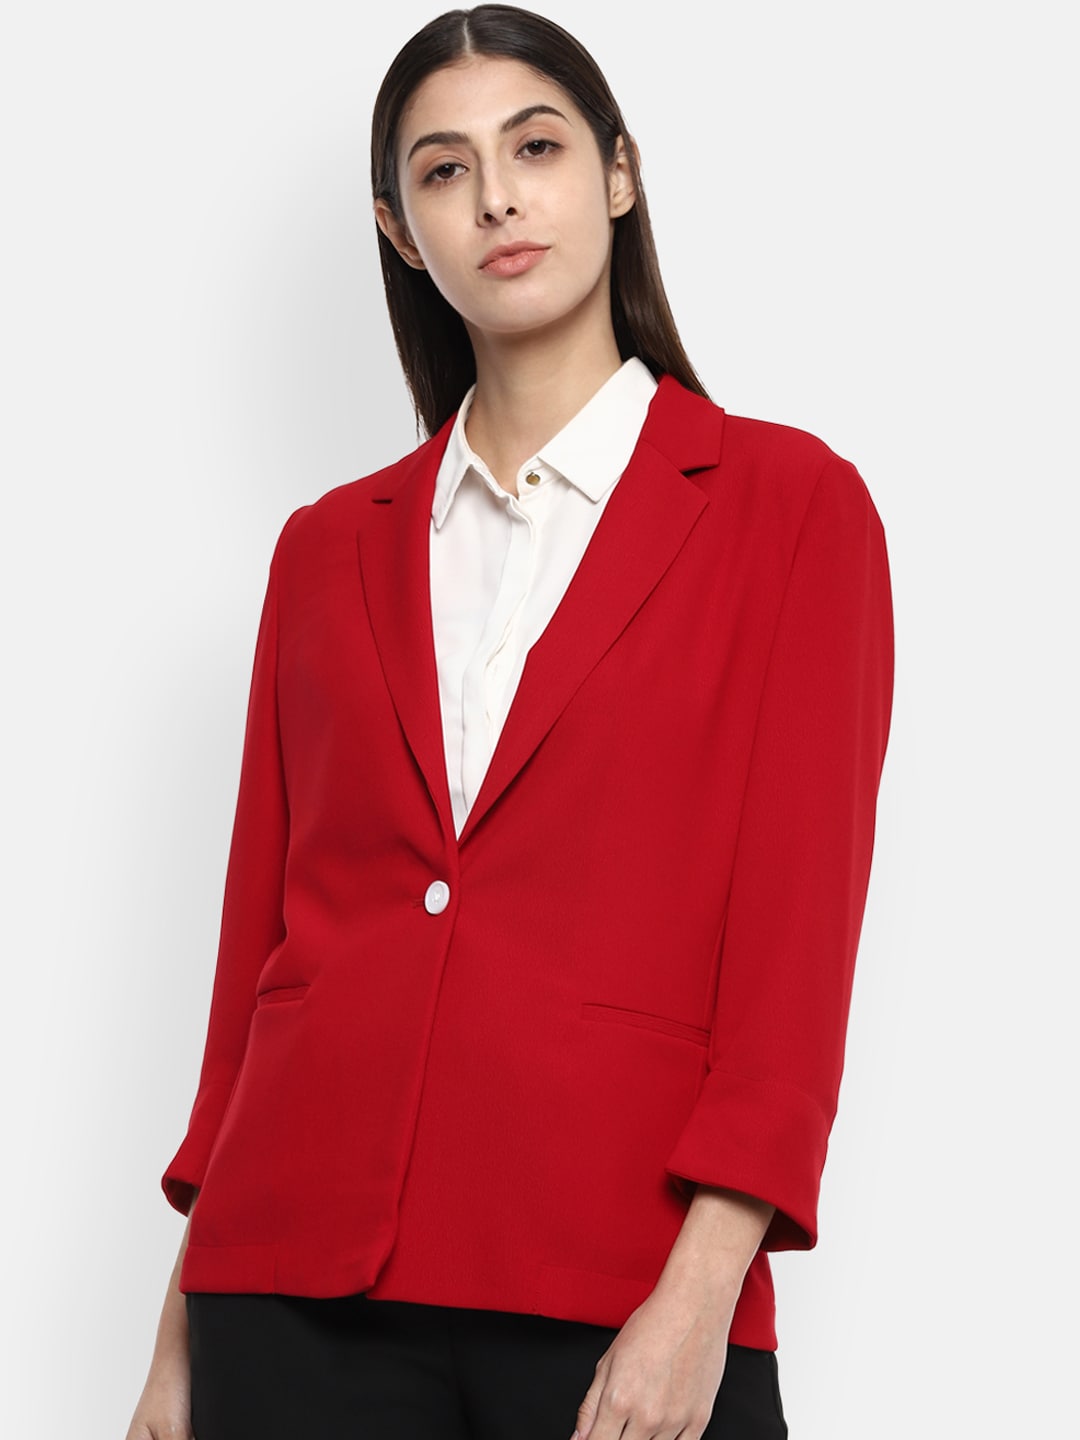 Van Heusen Woman Red Solid Single-Breasted Formal Blazer Price in India